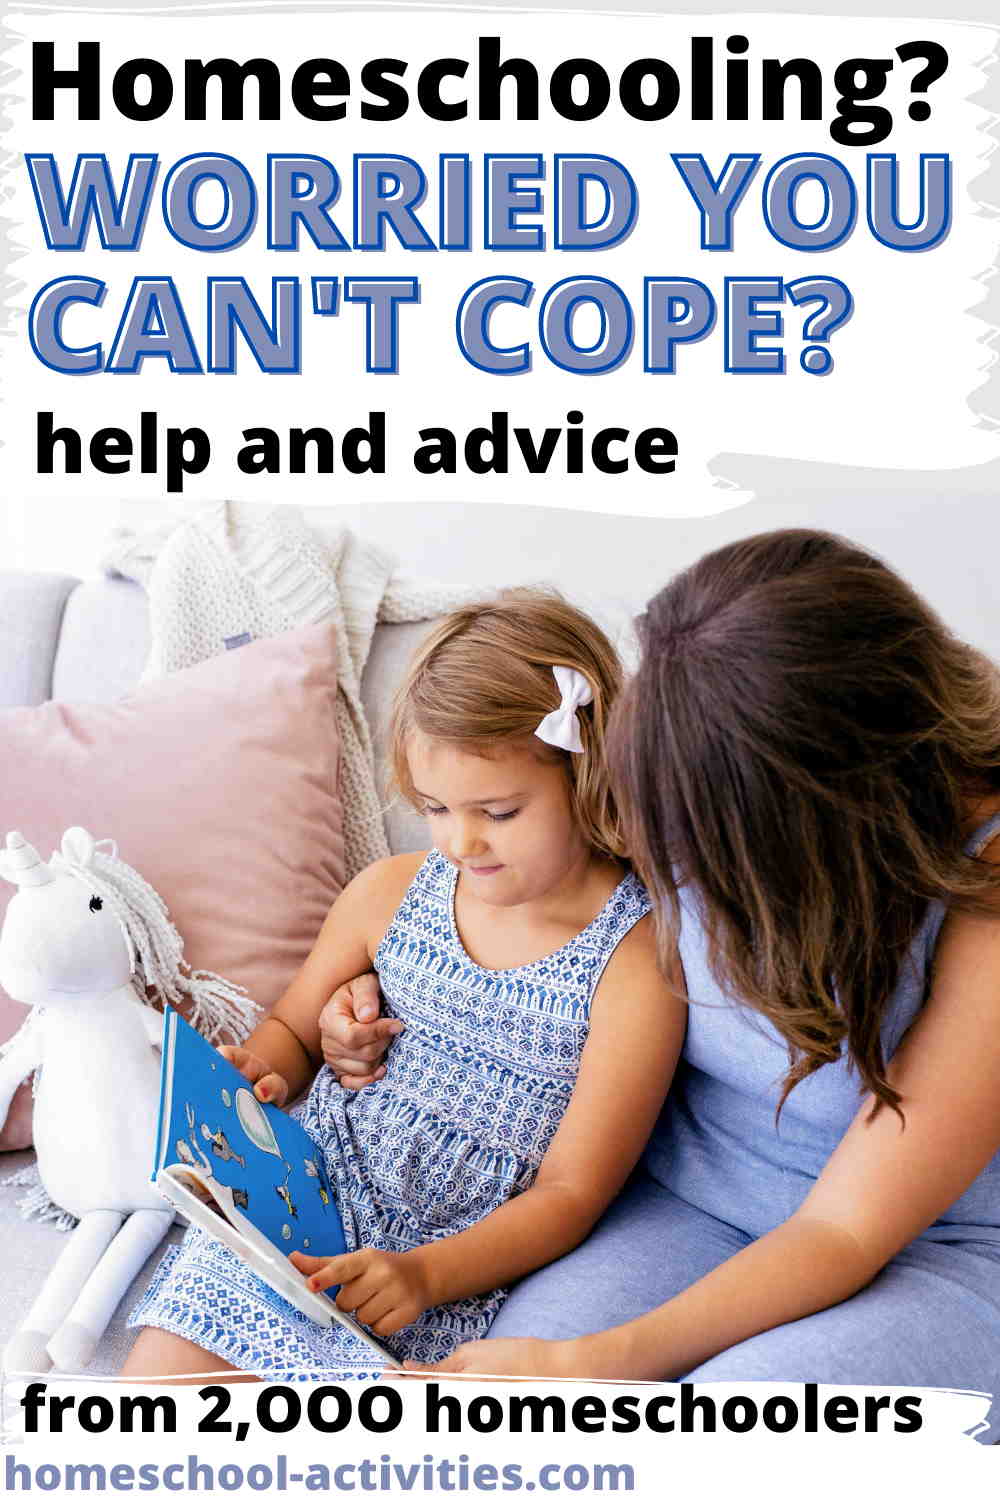 Home school fears: can I cope?